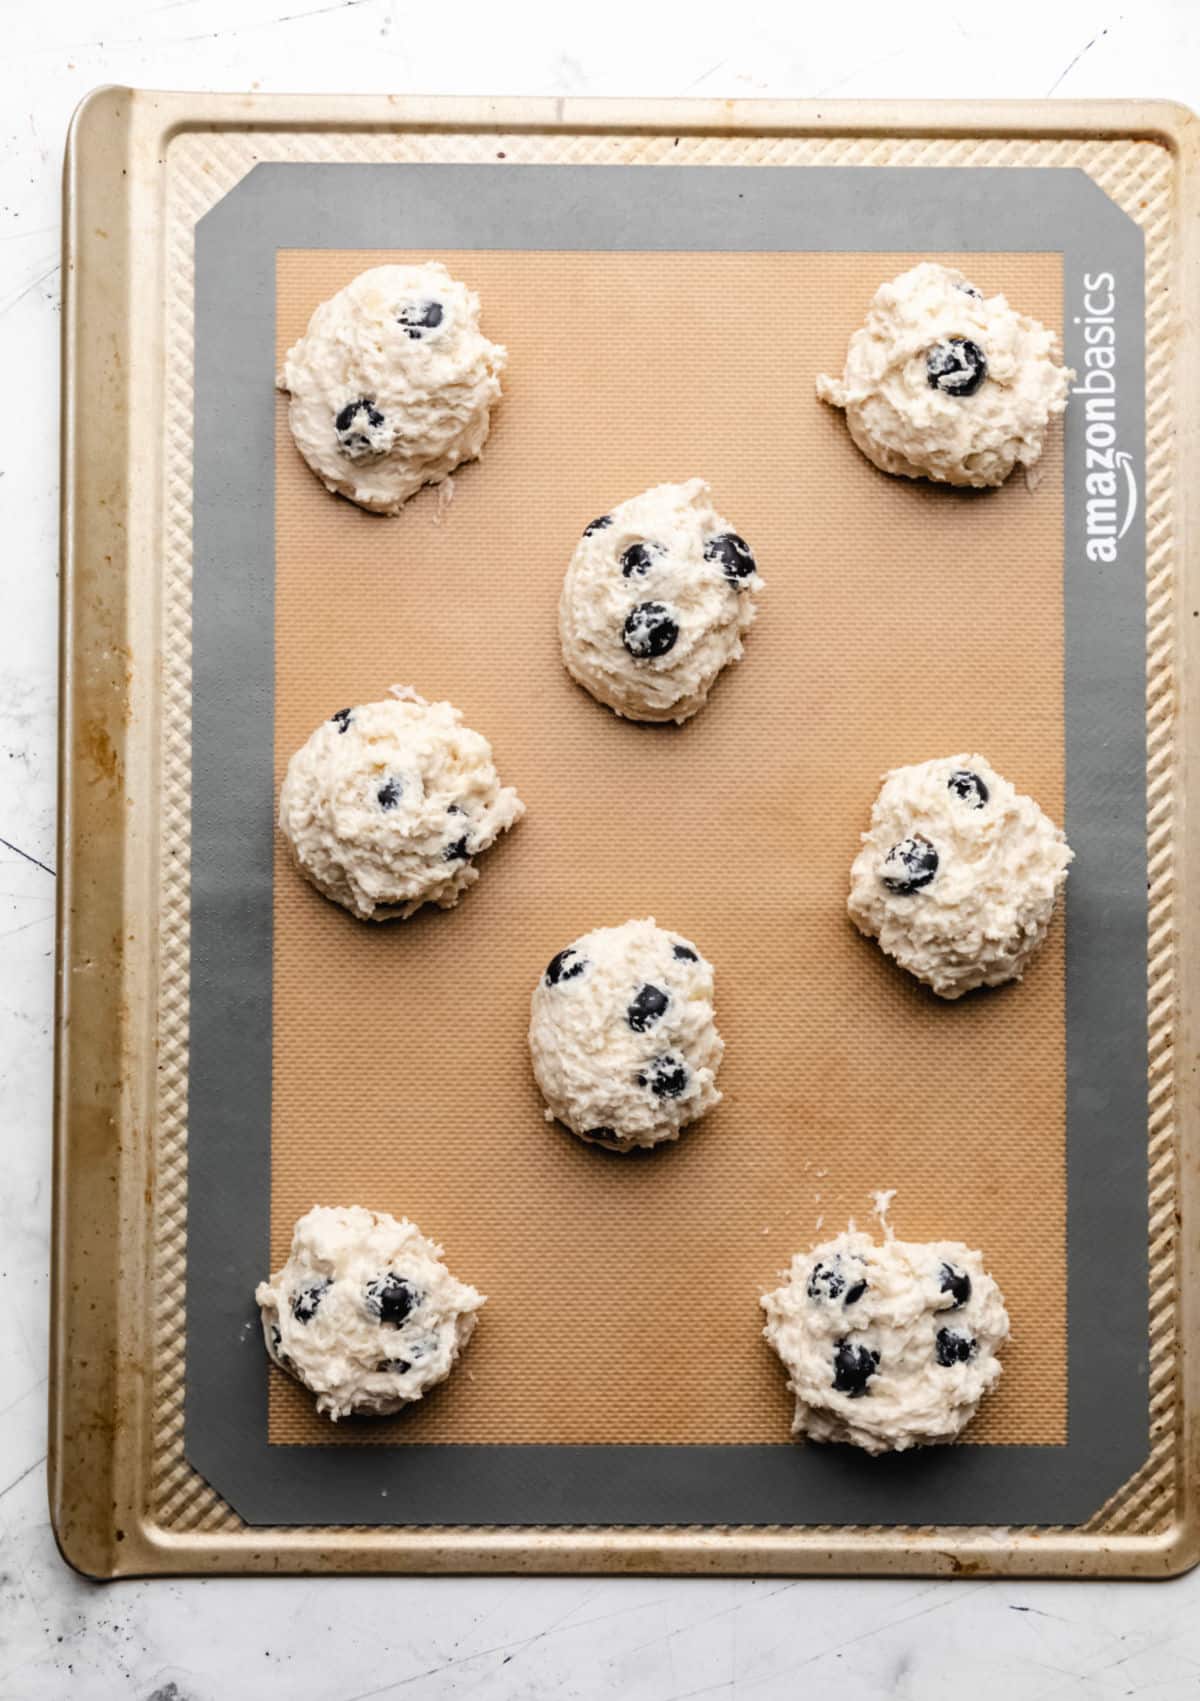 Unbaked blueberry biscuits on a baking sheet. 